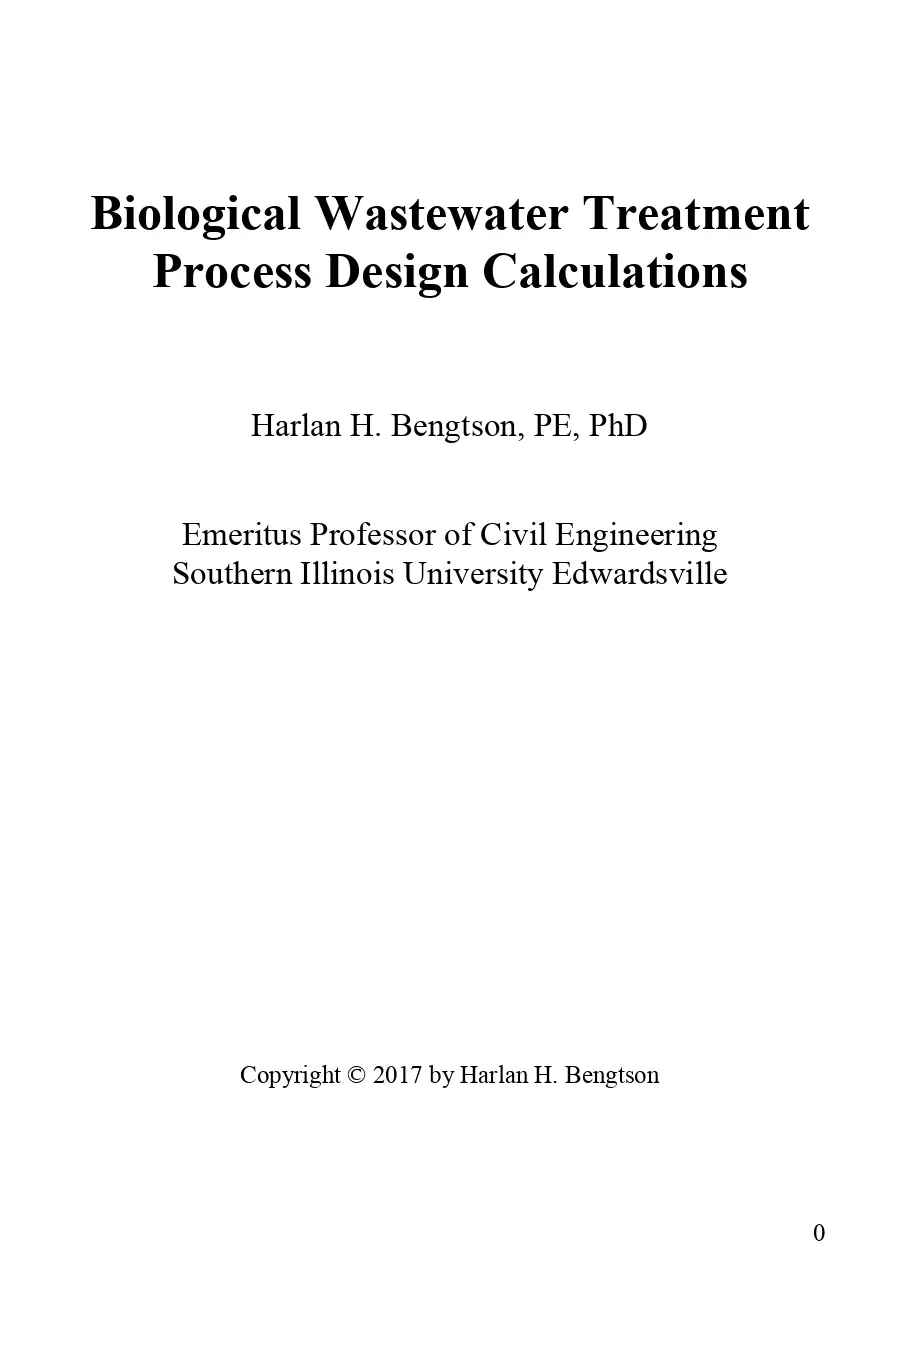 Biological Wastewater Treatment Process Design Calculations